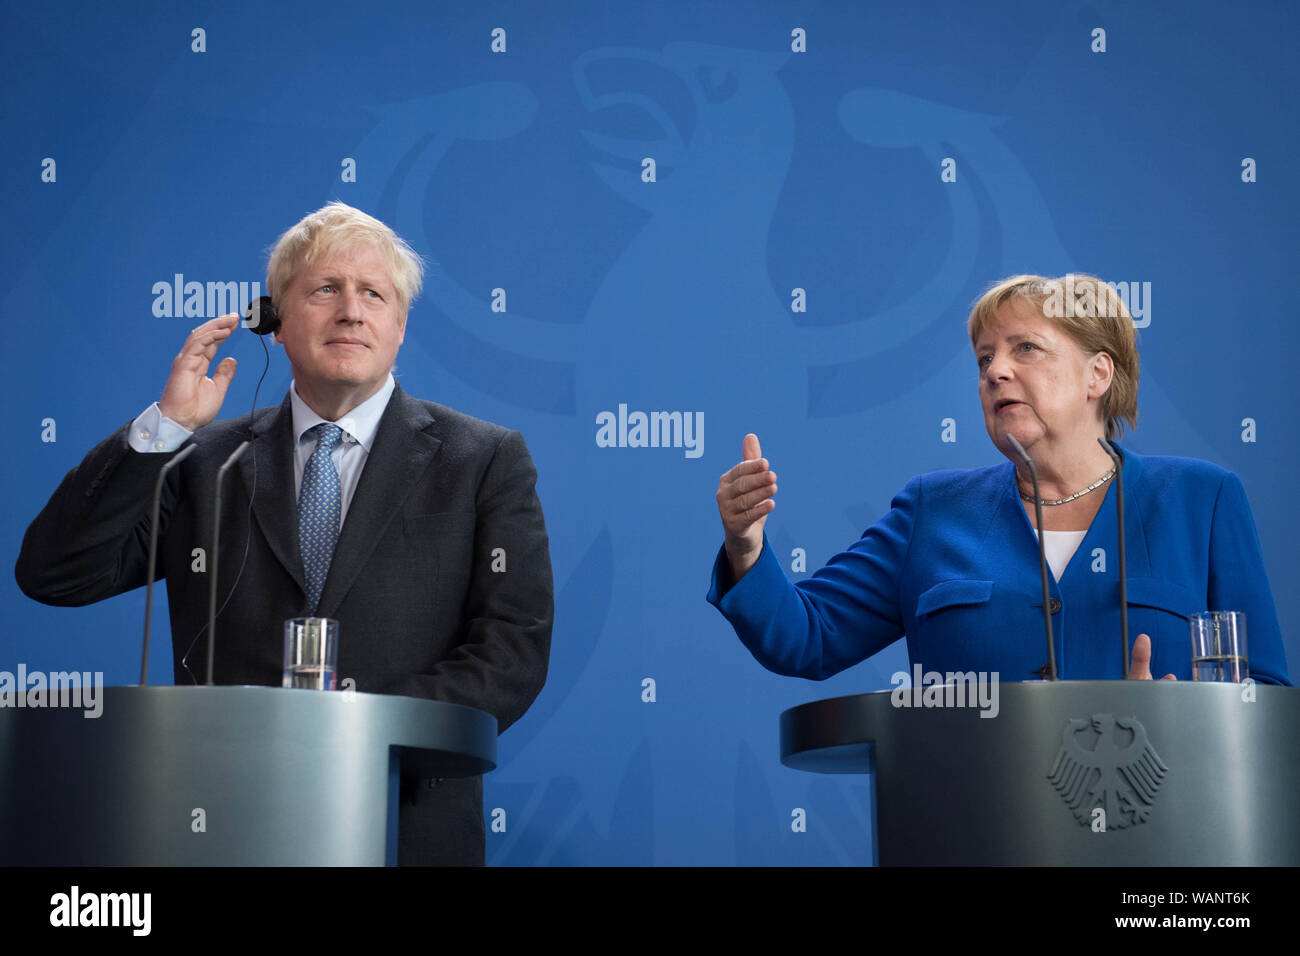 Prime Minister Boris Johnson holds a joint press conference with German Chancellor Angela Merkel in Berlin, ahead of talks to try to break the Brexit deadlock. Stock Photo